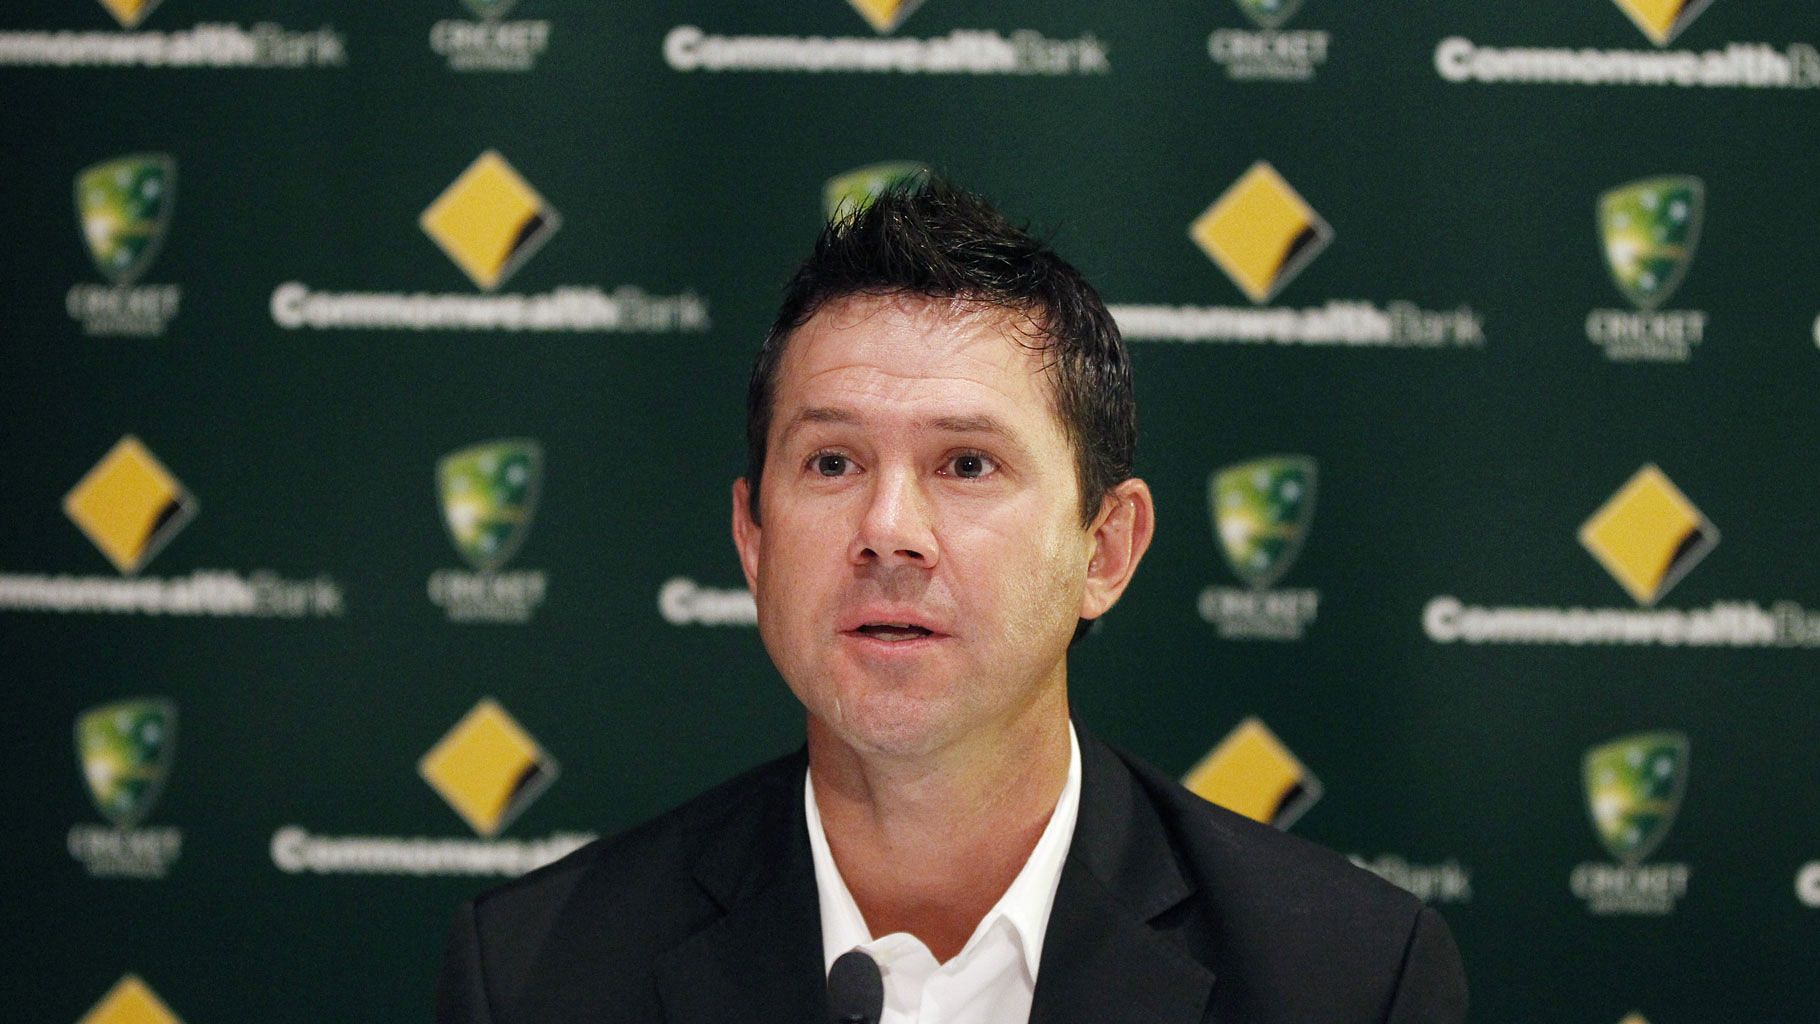 File Image of Ricky Ponting